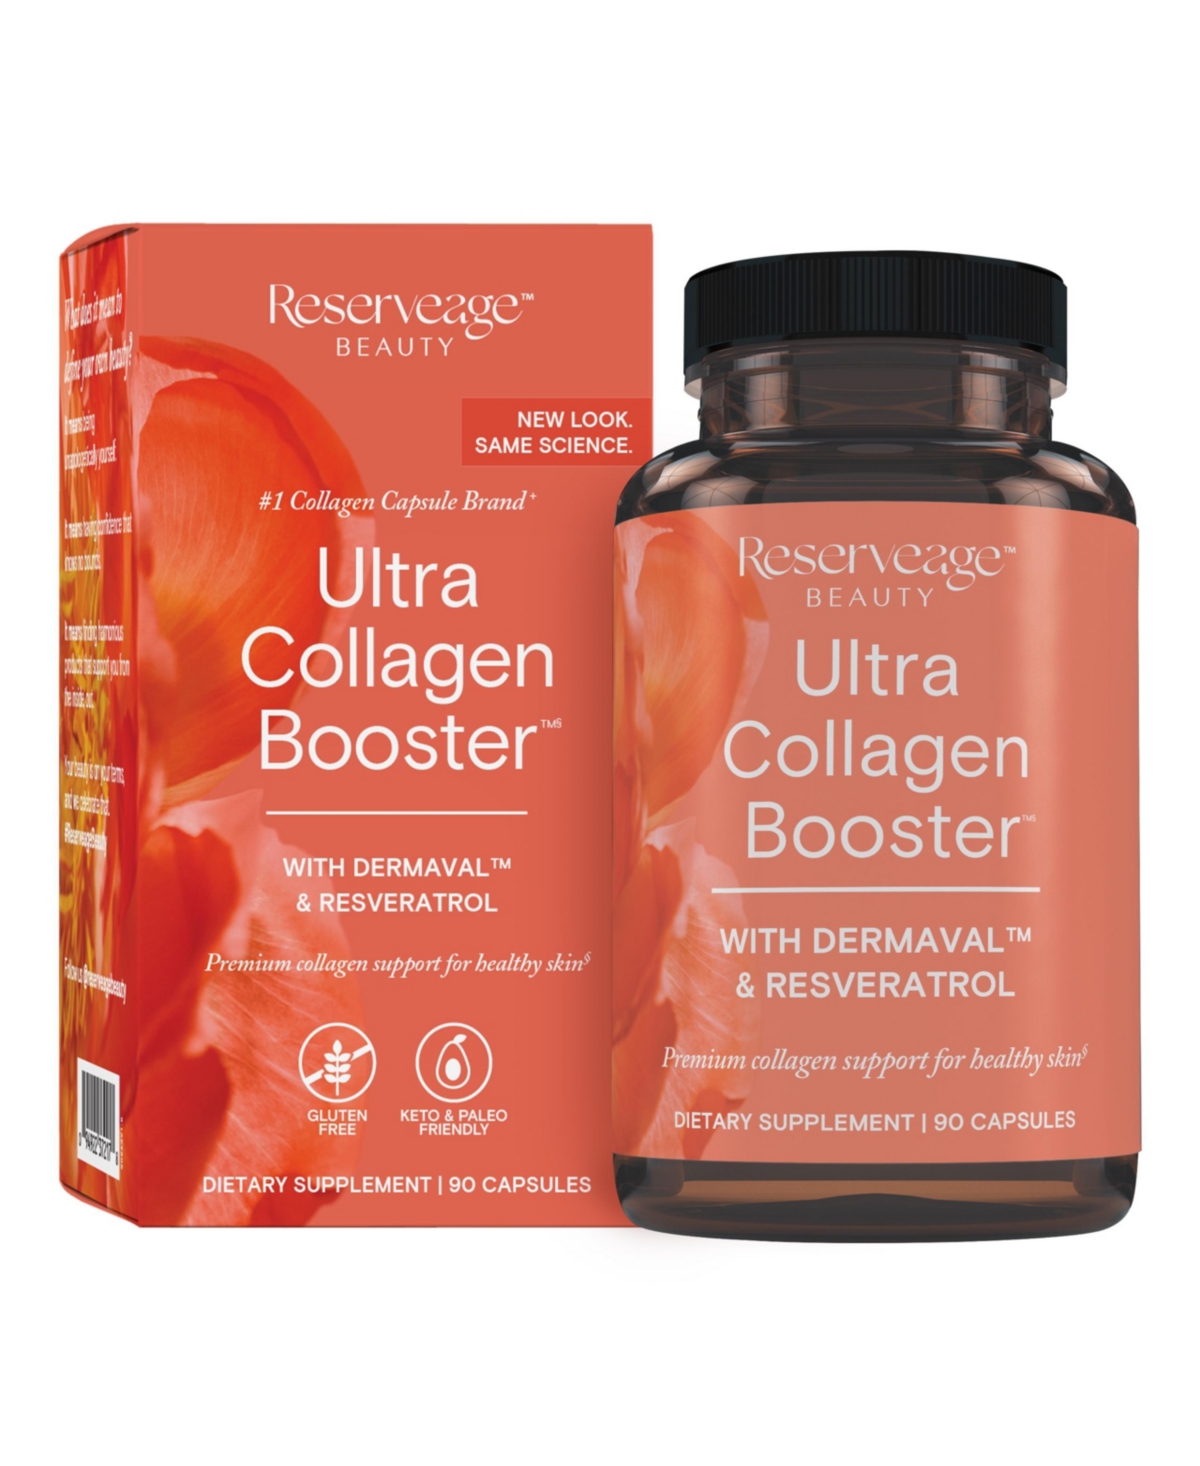 Ultra Collagen Booster, Skin Supplement, Supports Healthy Collagen Production, 90 Capsules